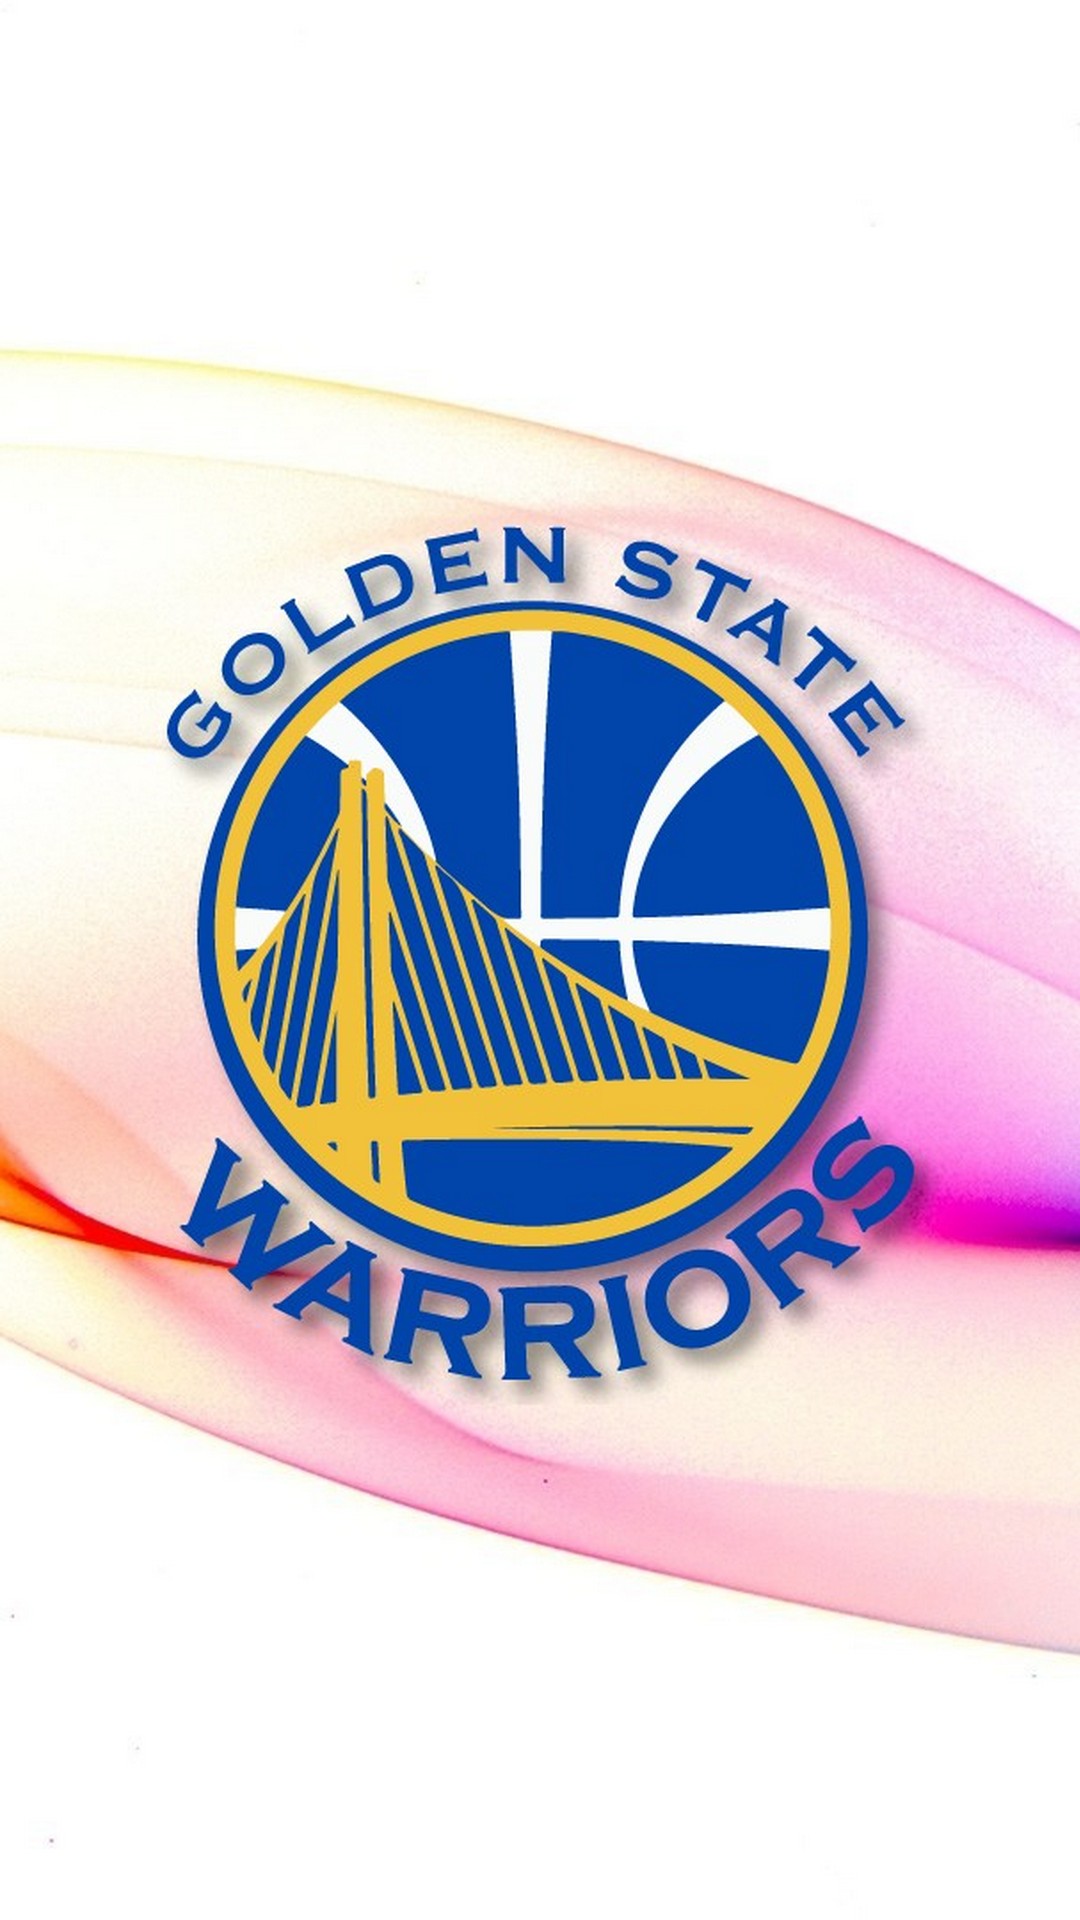 Golden State Warriors Wallpaper For iPhone with image resolution 1080x1920 pixel. You can make this wallpaper for your iPhone 5, 6, 7, 8, X backgrounds, Mobile Screensaver, or iPad Lock Screen